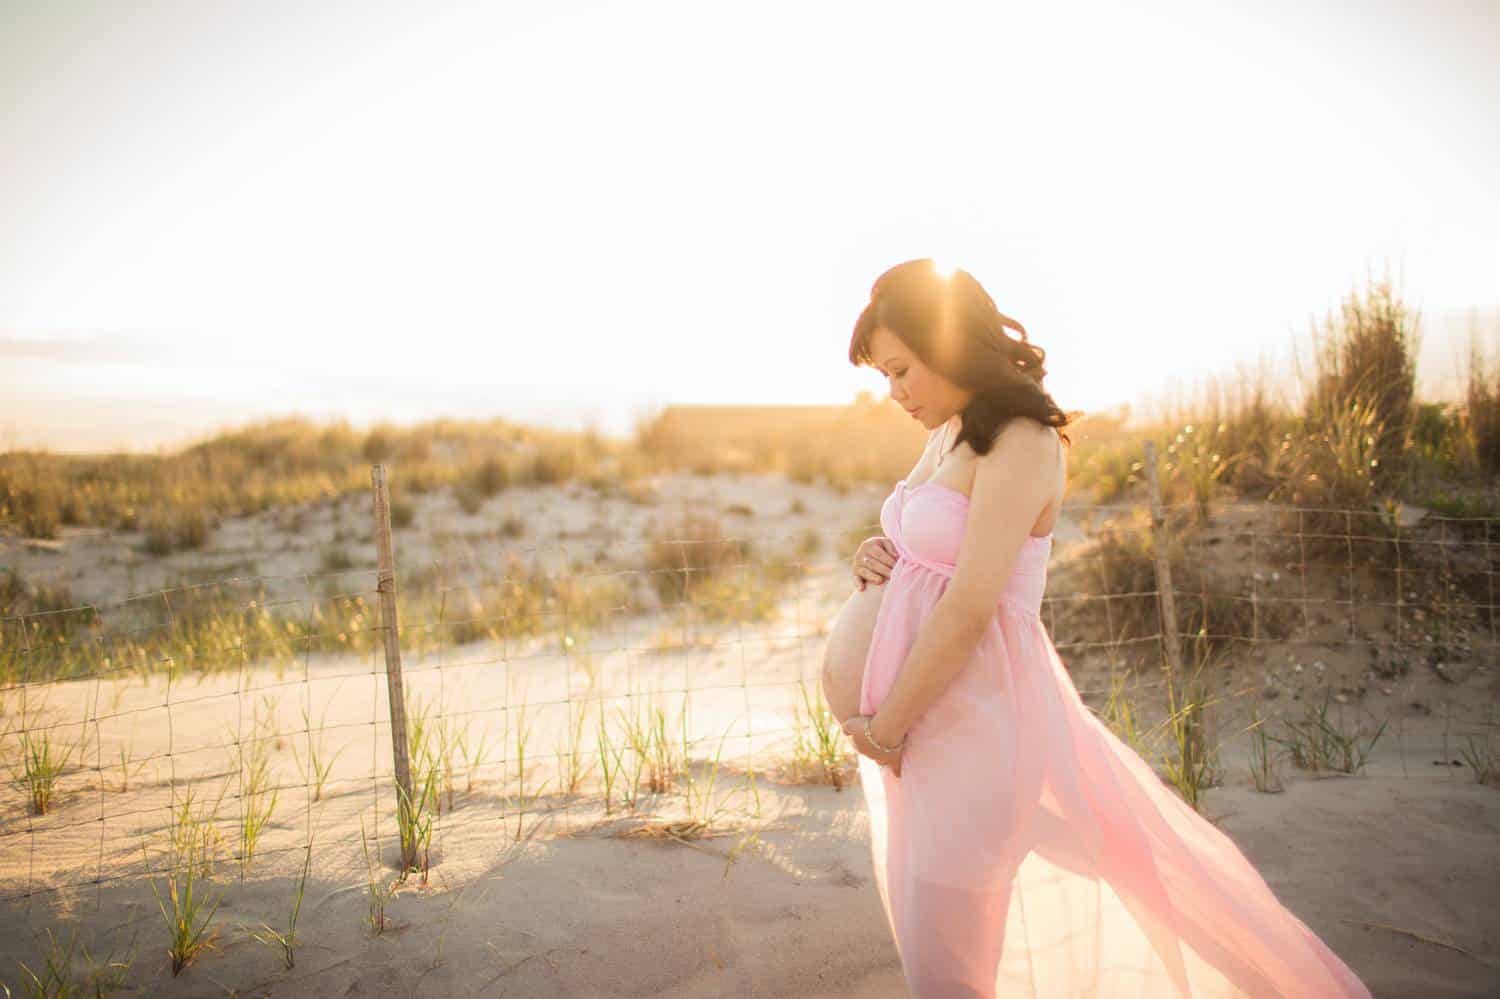 A pregnant woman in a flowing, pink, semi-sheer gown cradles her belly and gazes down toward her unborn child. She's standing on a beach shortly before sunset with dune grass and a bright sky behind her.